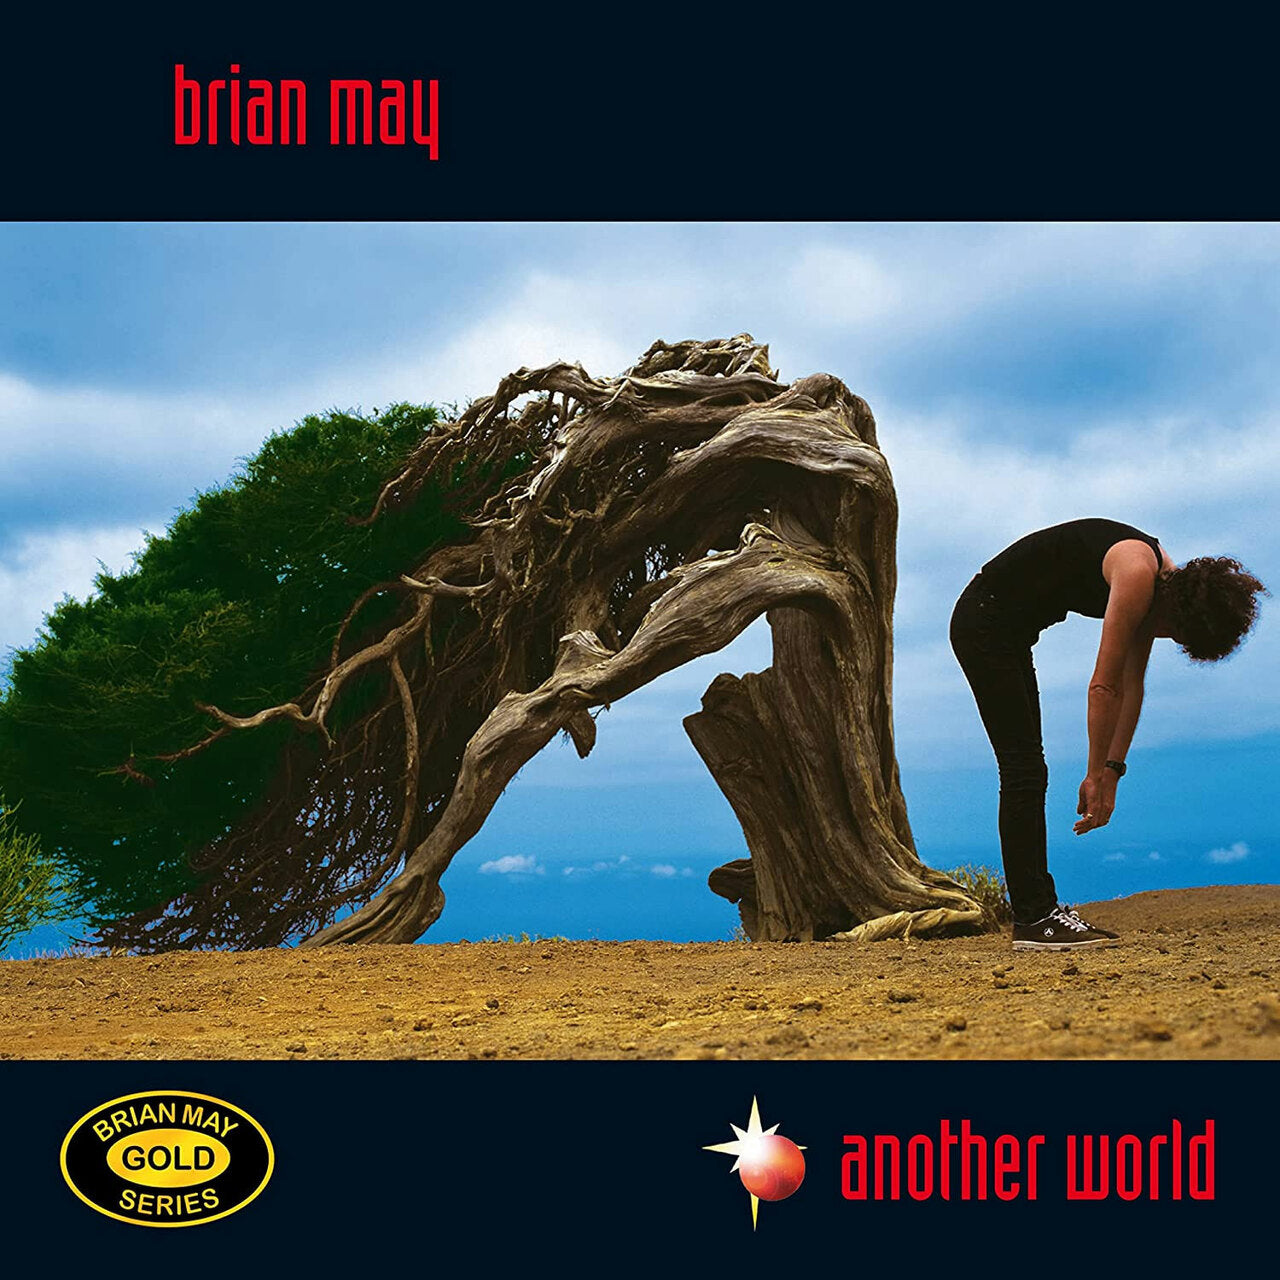 BRIAN MAY 'ANOTHER WORLD' LP